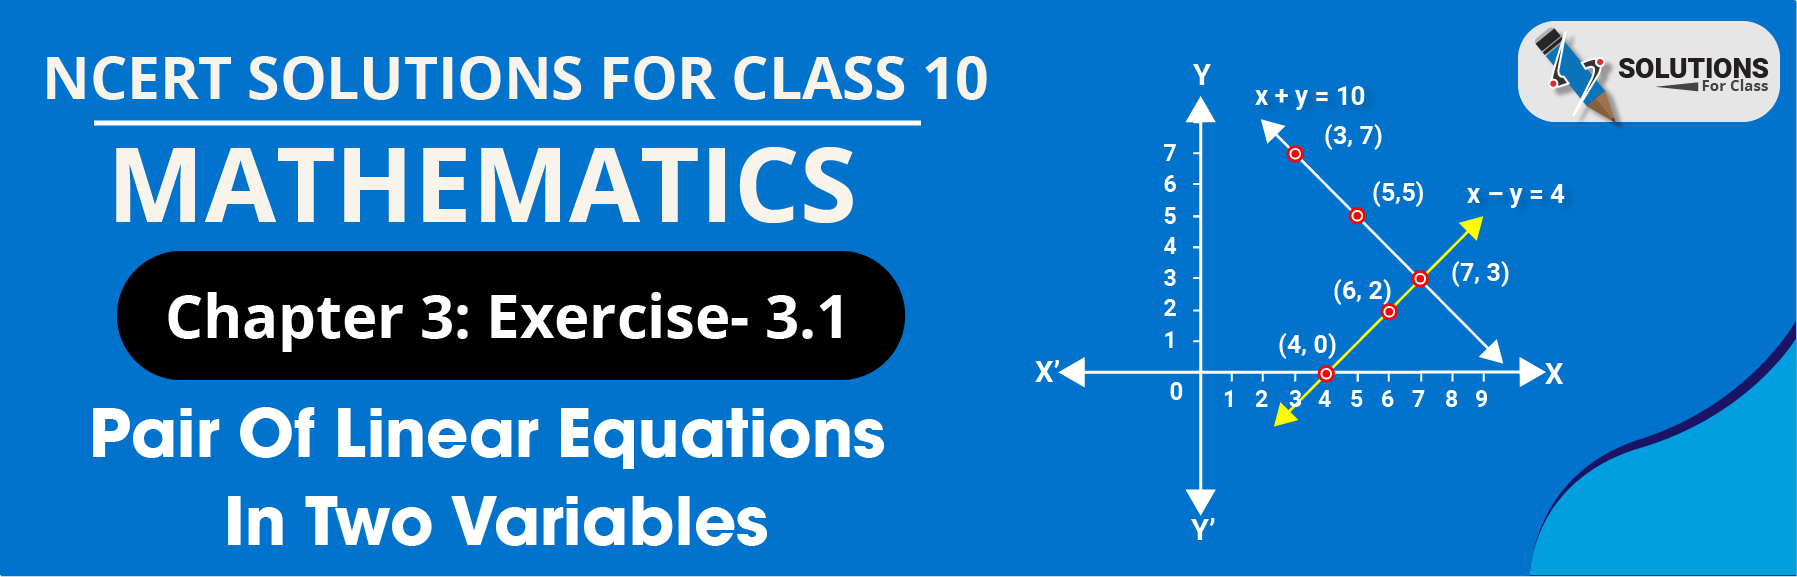 NCERT Solution For Class 10, Maths, Pair Of Linear Equations In Two Variables, Exercise 3.1